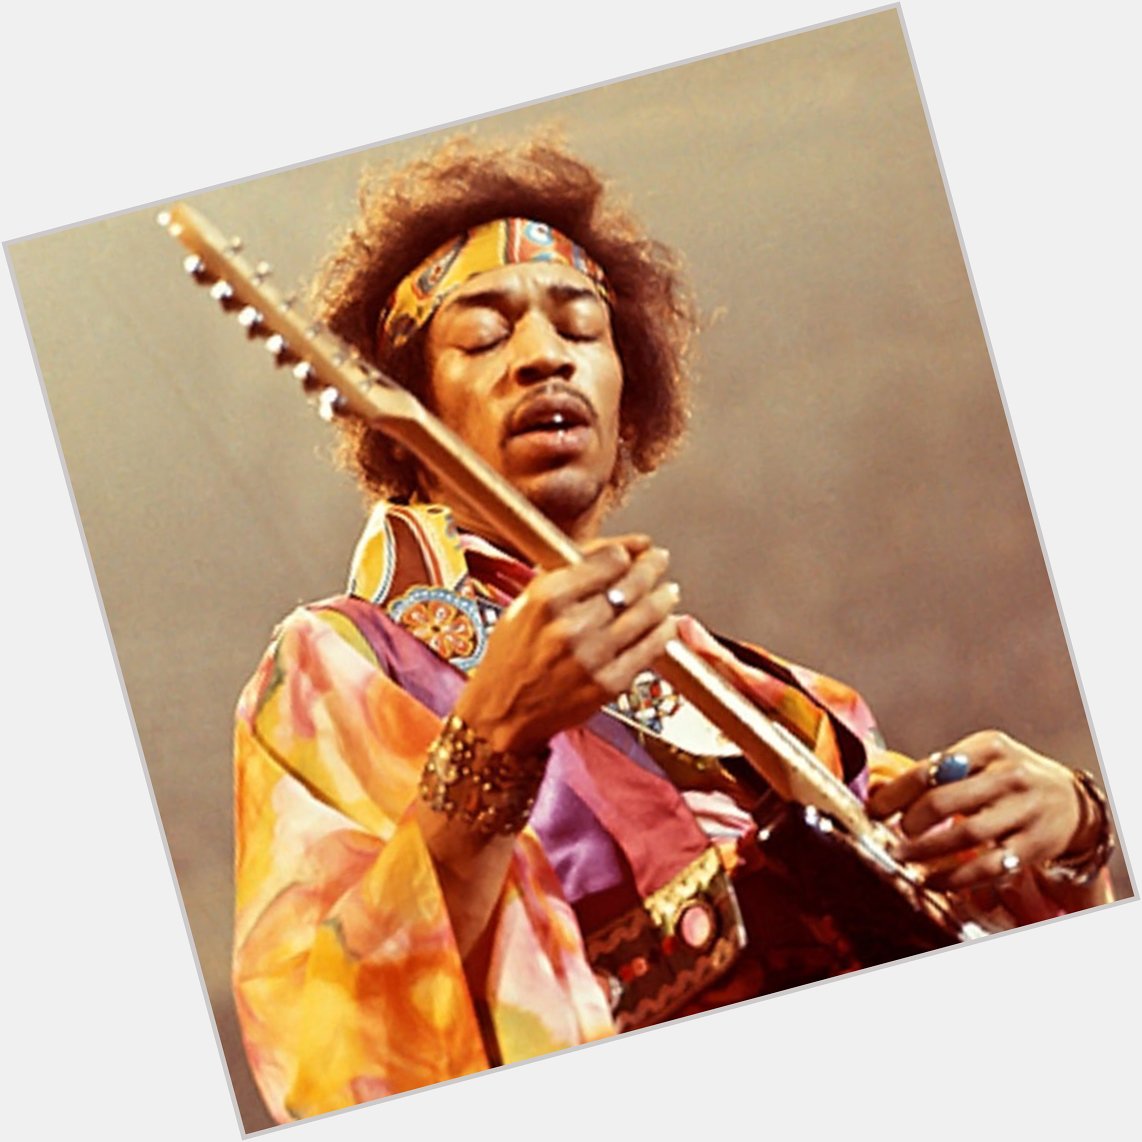 Jimi Hendrix was born this day 80 years ago. Happy birthday to the 